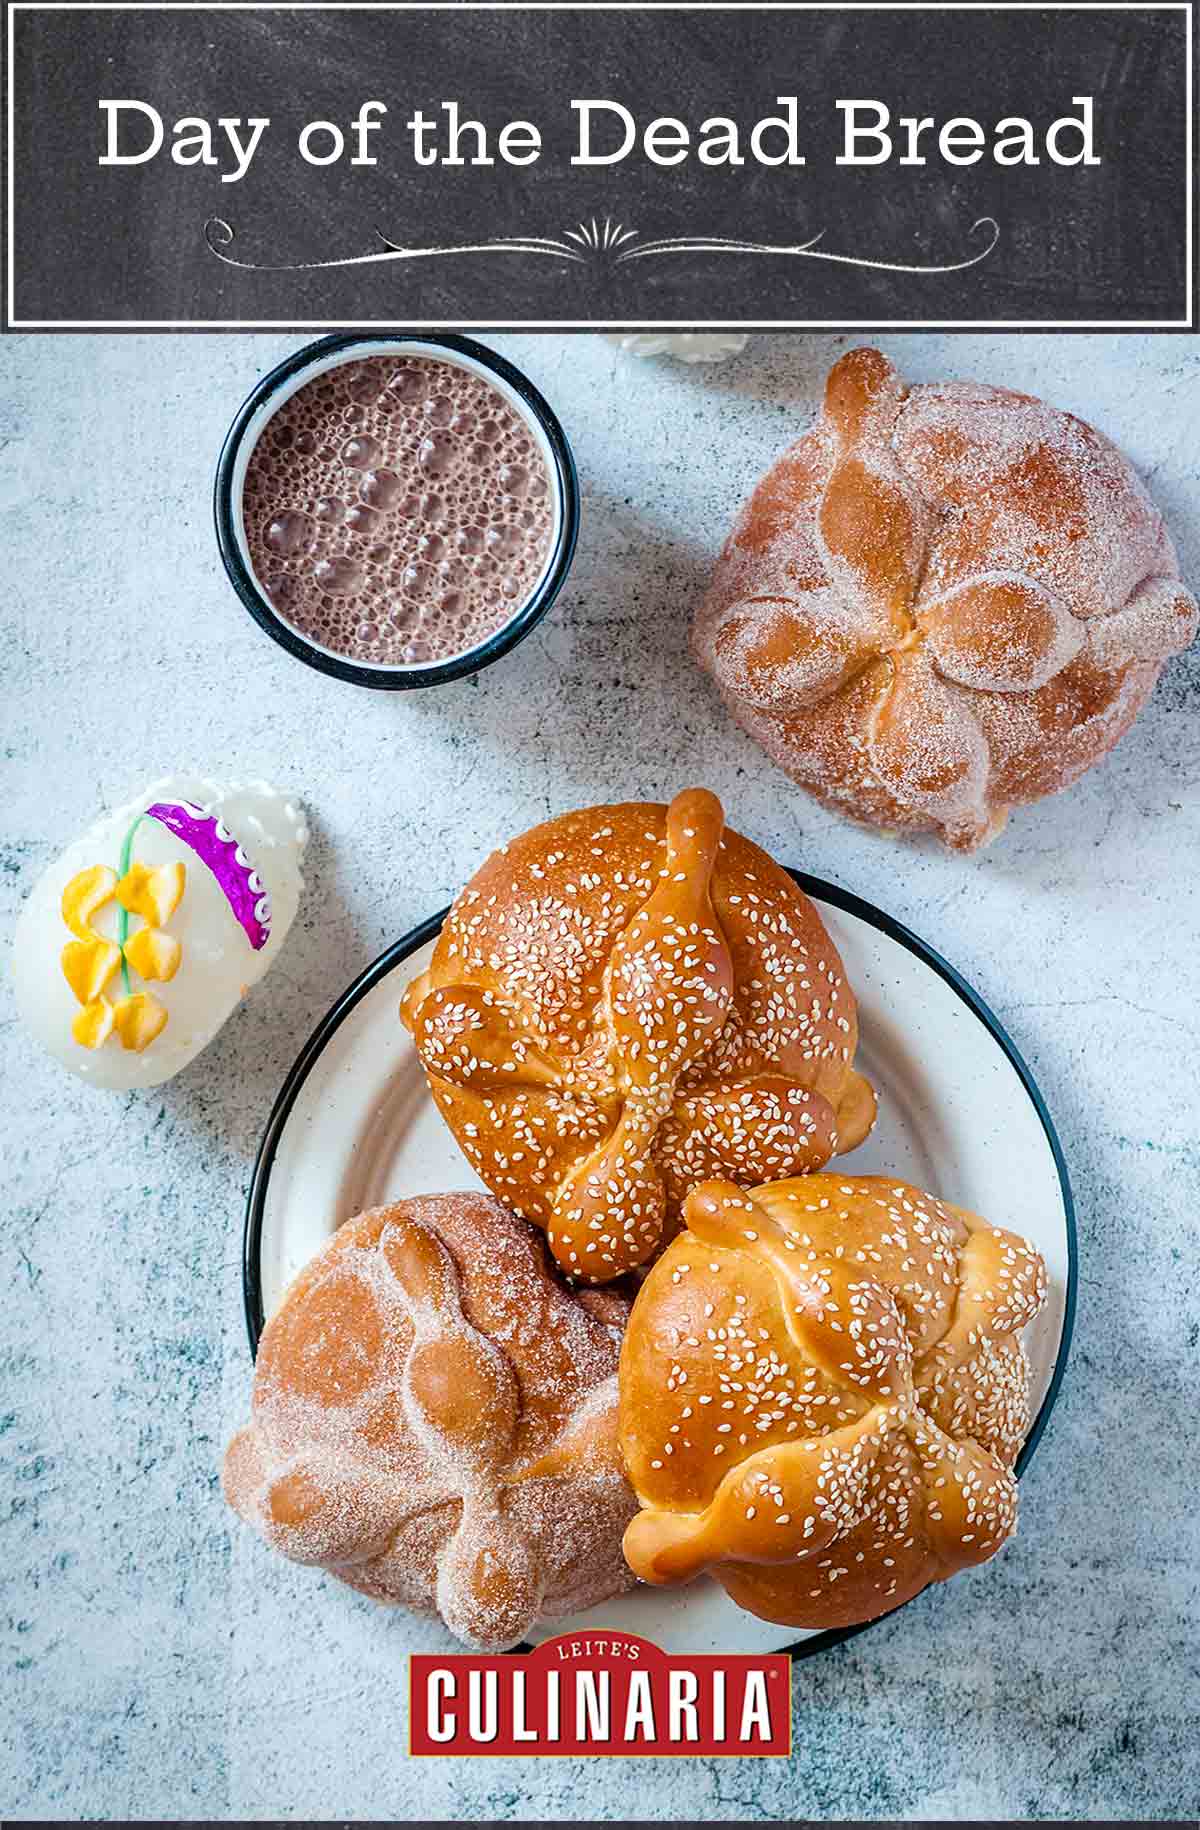 Day of the Dead bread on a plate, 2 with sugar and 2 with white sesame seeds, beside a cup of Mexican hot chocolate and a sugar skull.